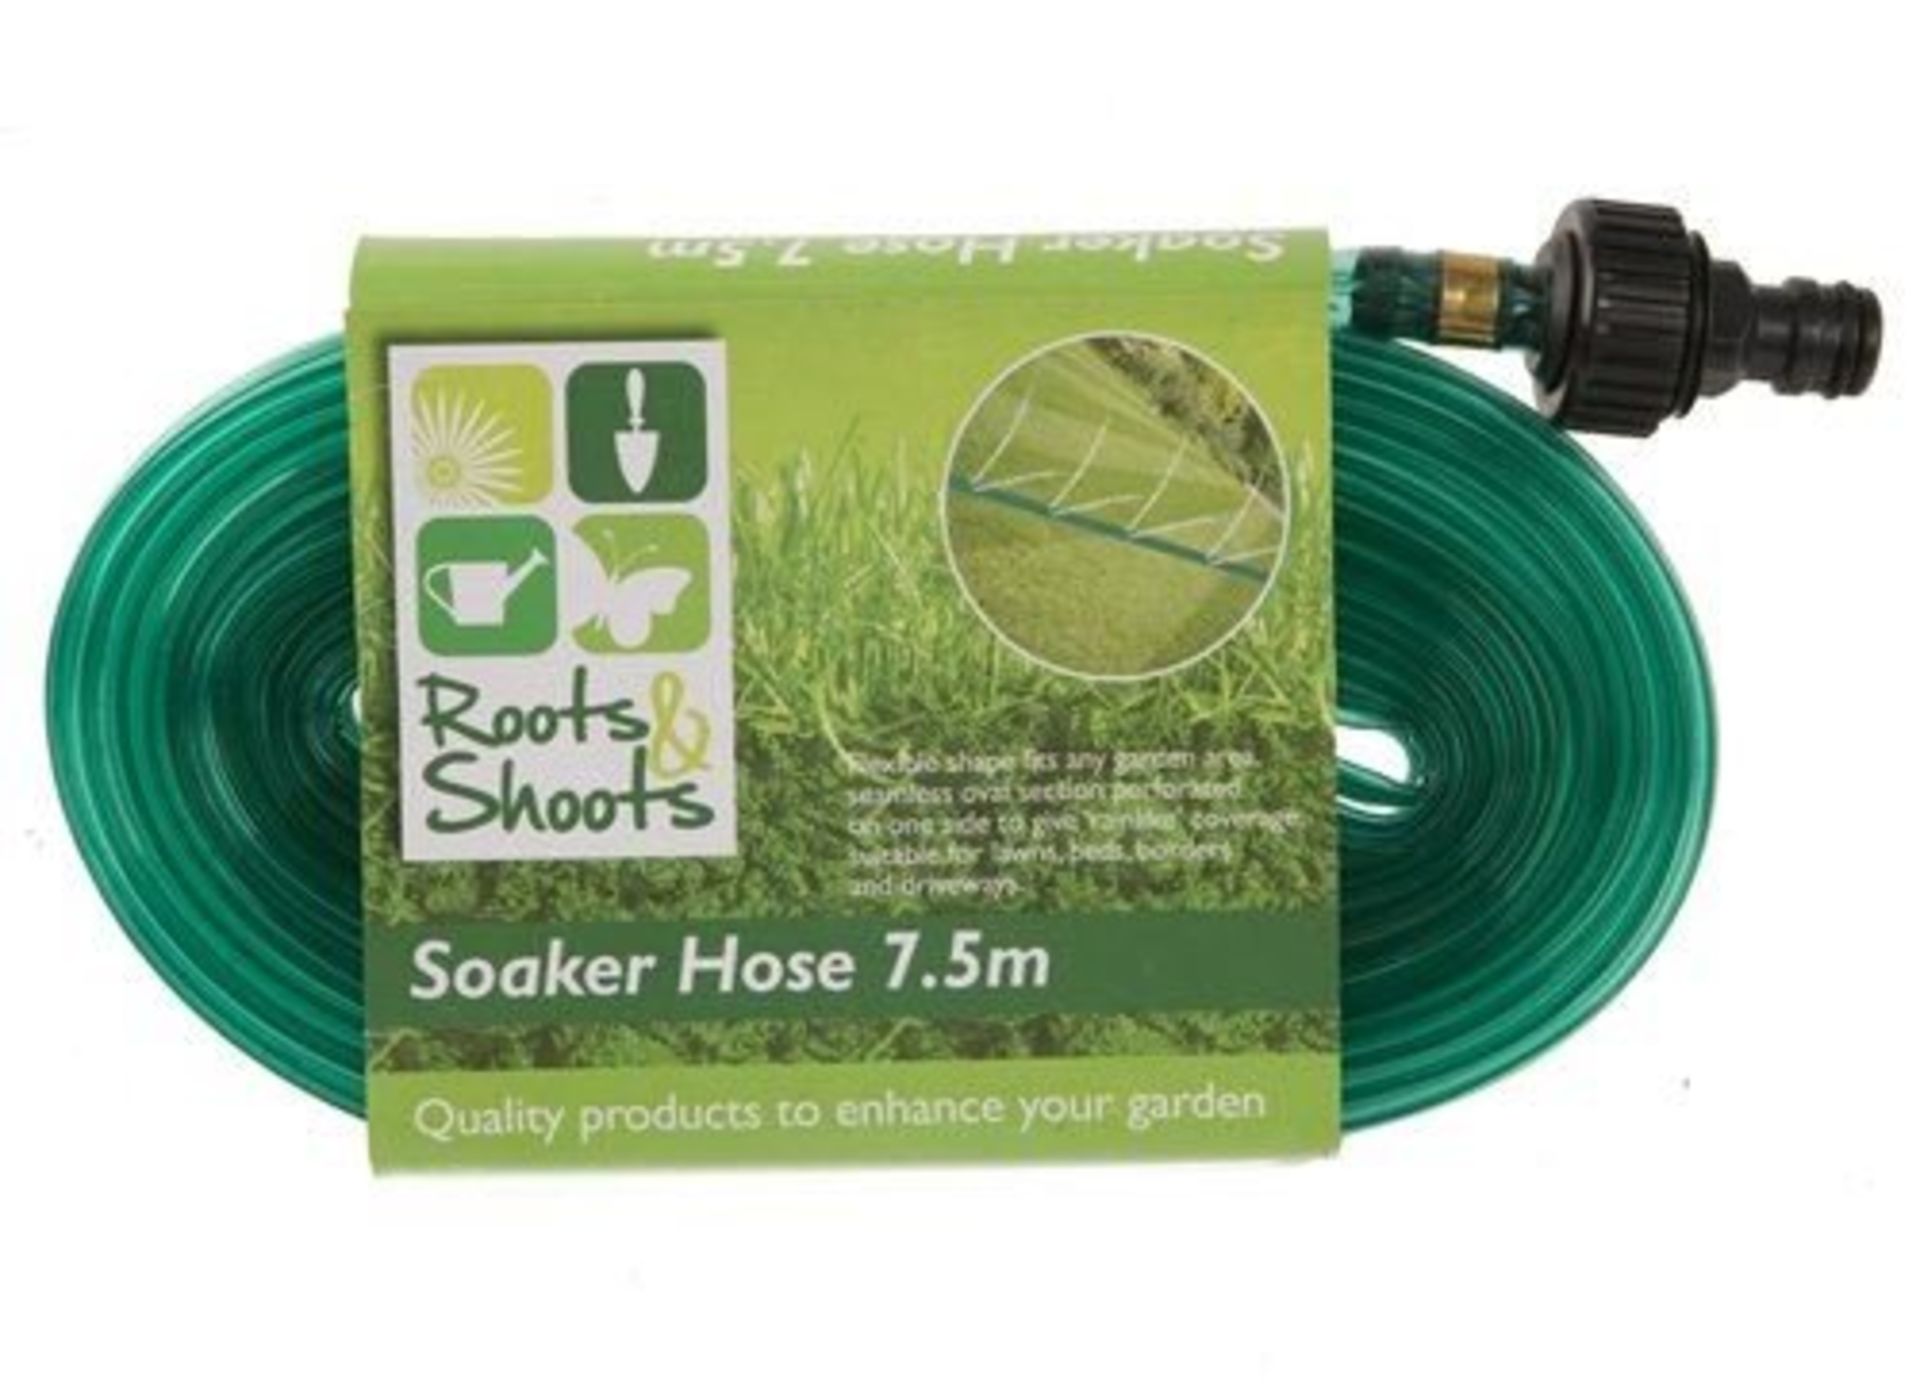 V Brand New 7.5 Metre Soaker Hose Oval Hose Perforated On One side To Give Rainlike Coverage